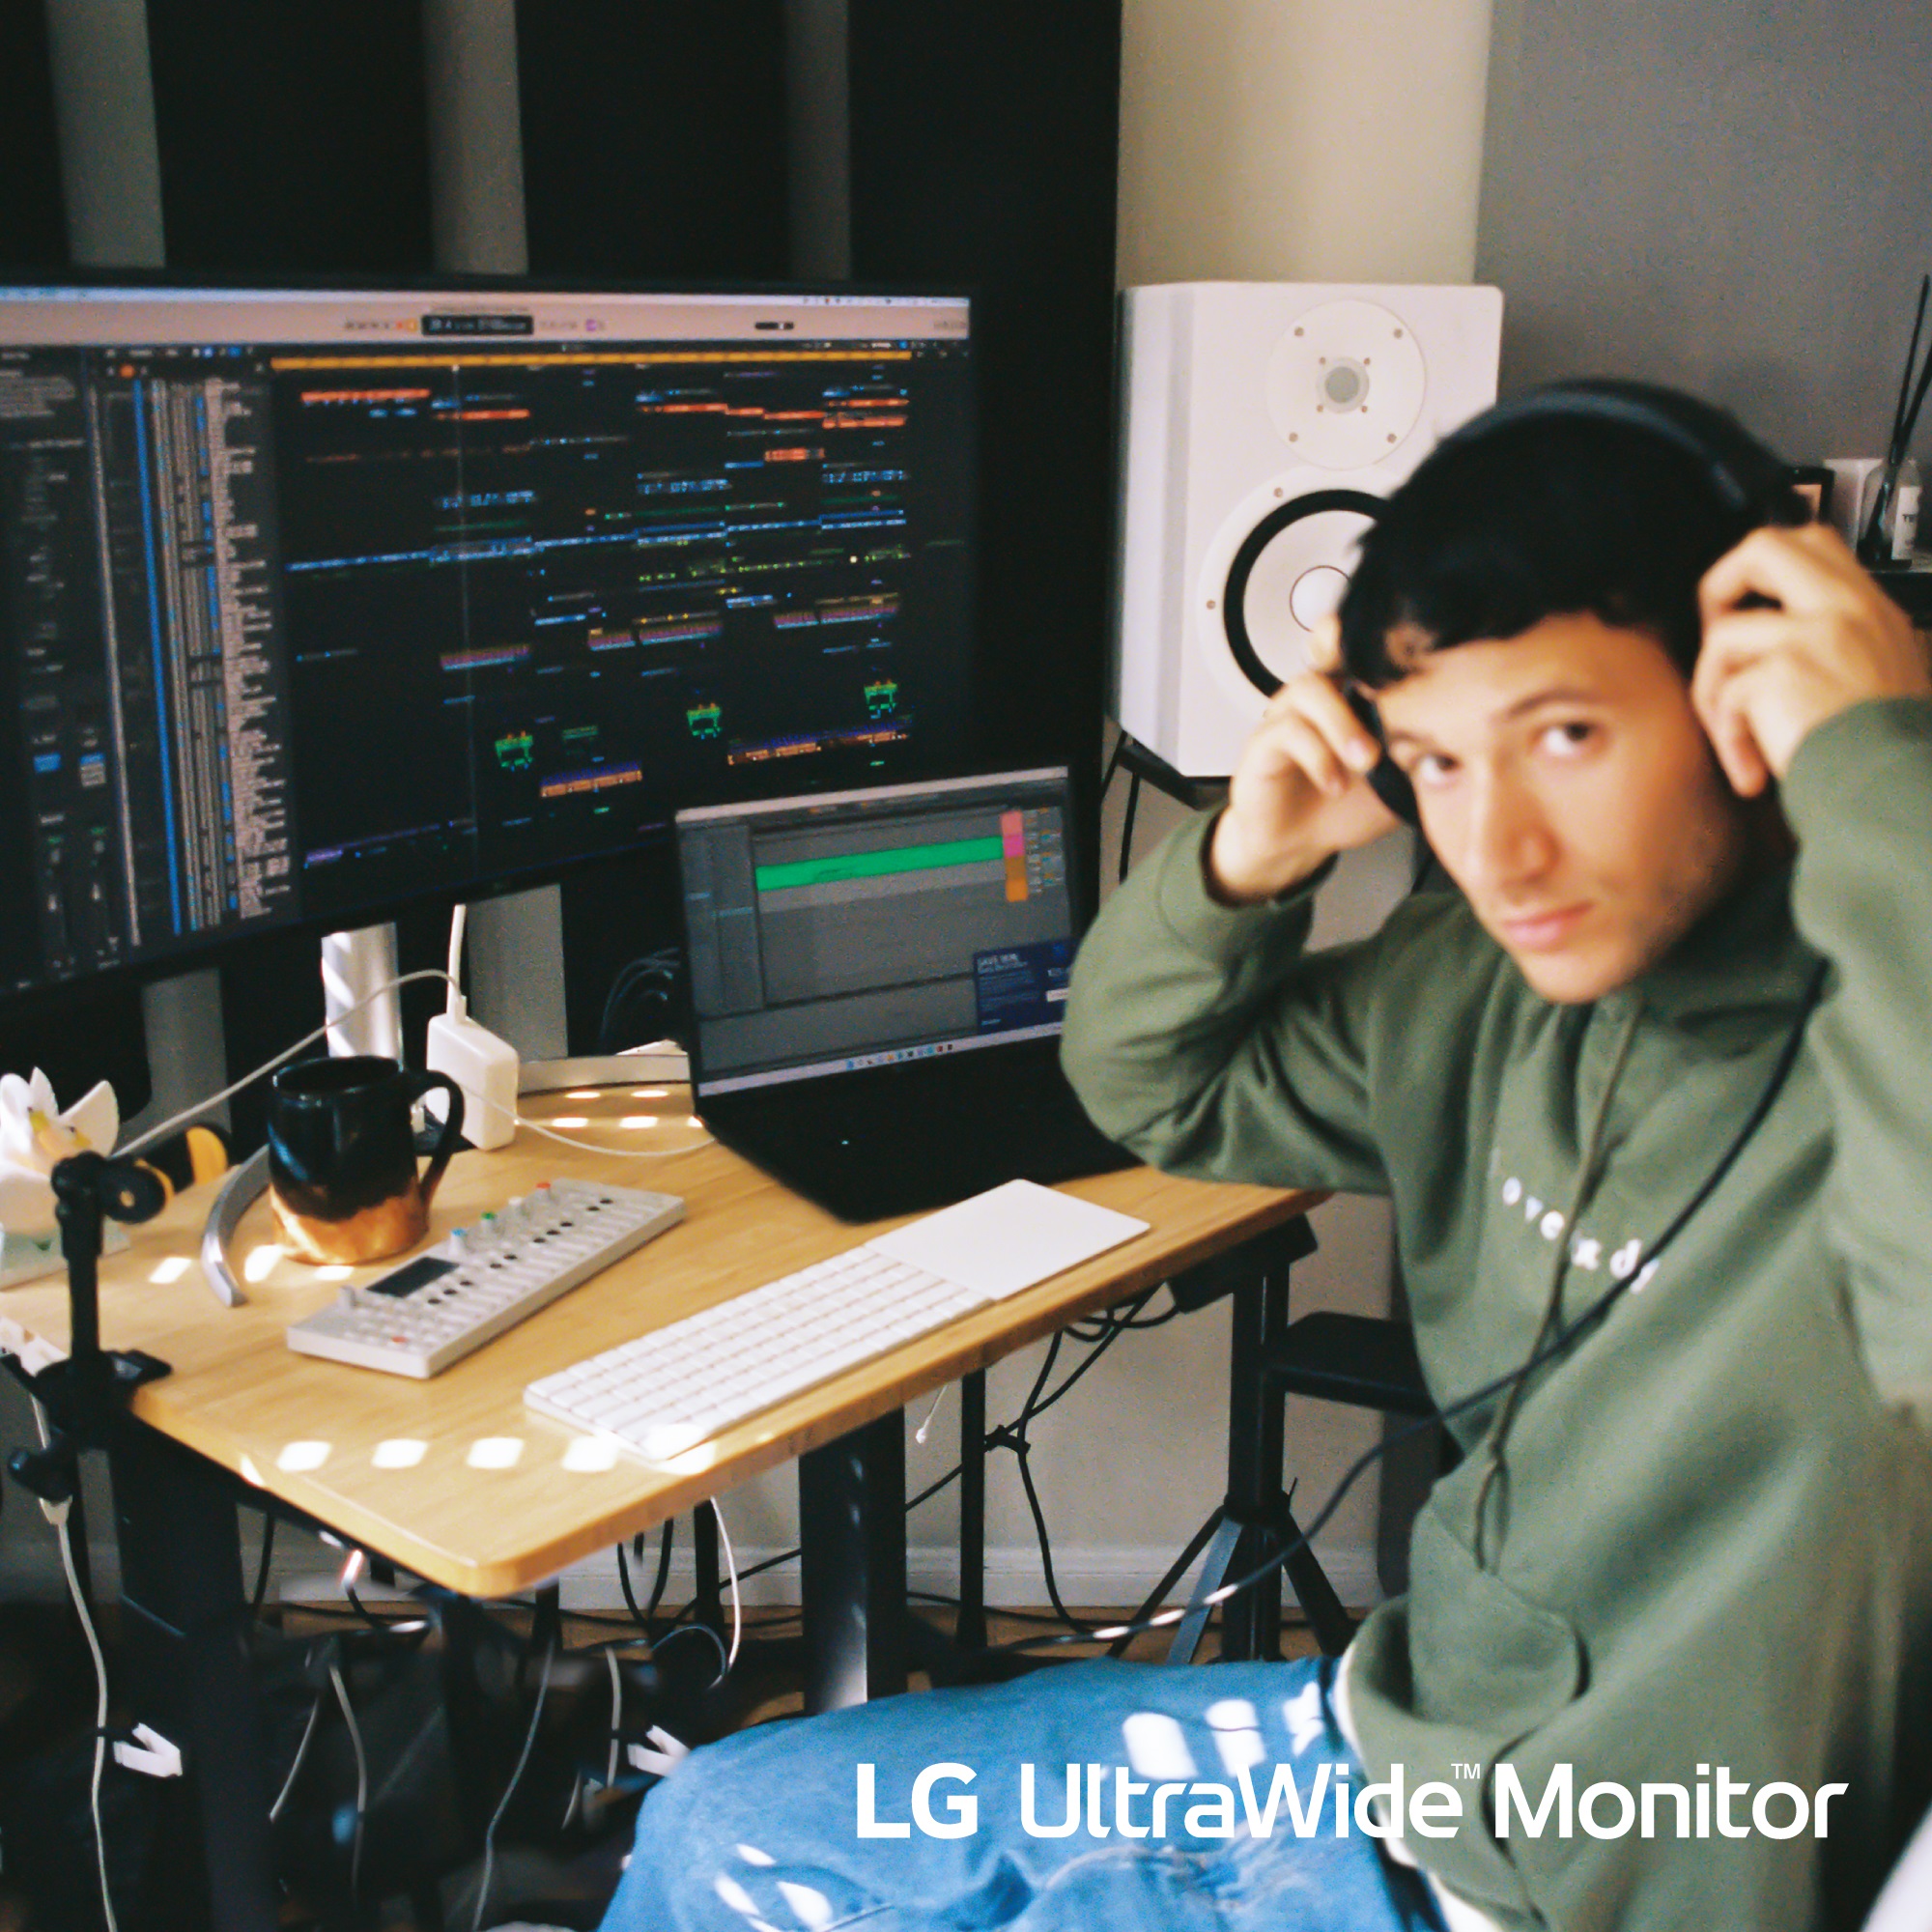 Jeremy Zucker working on his music with LG UltraWide monitor